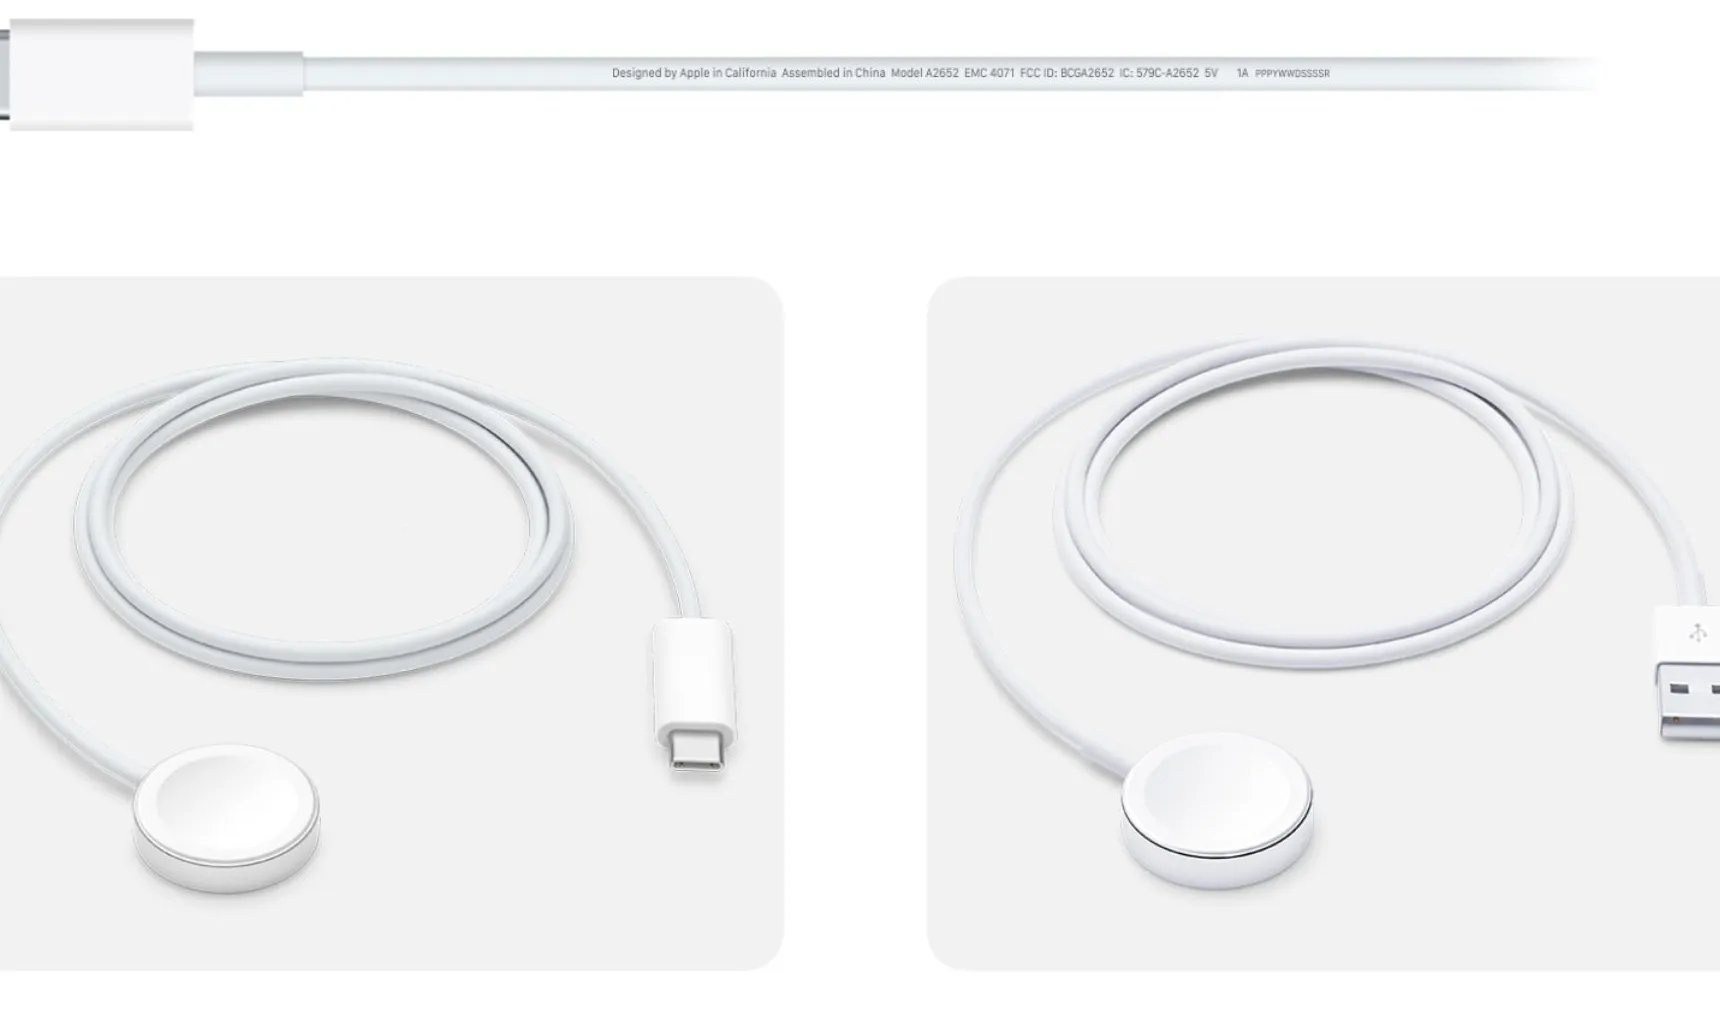 Official Apple Watch chargers. (Image: Apple)